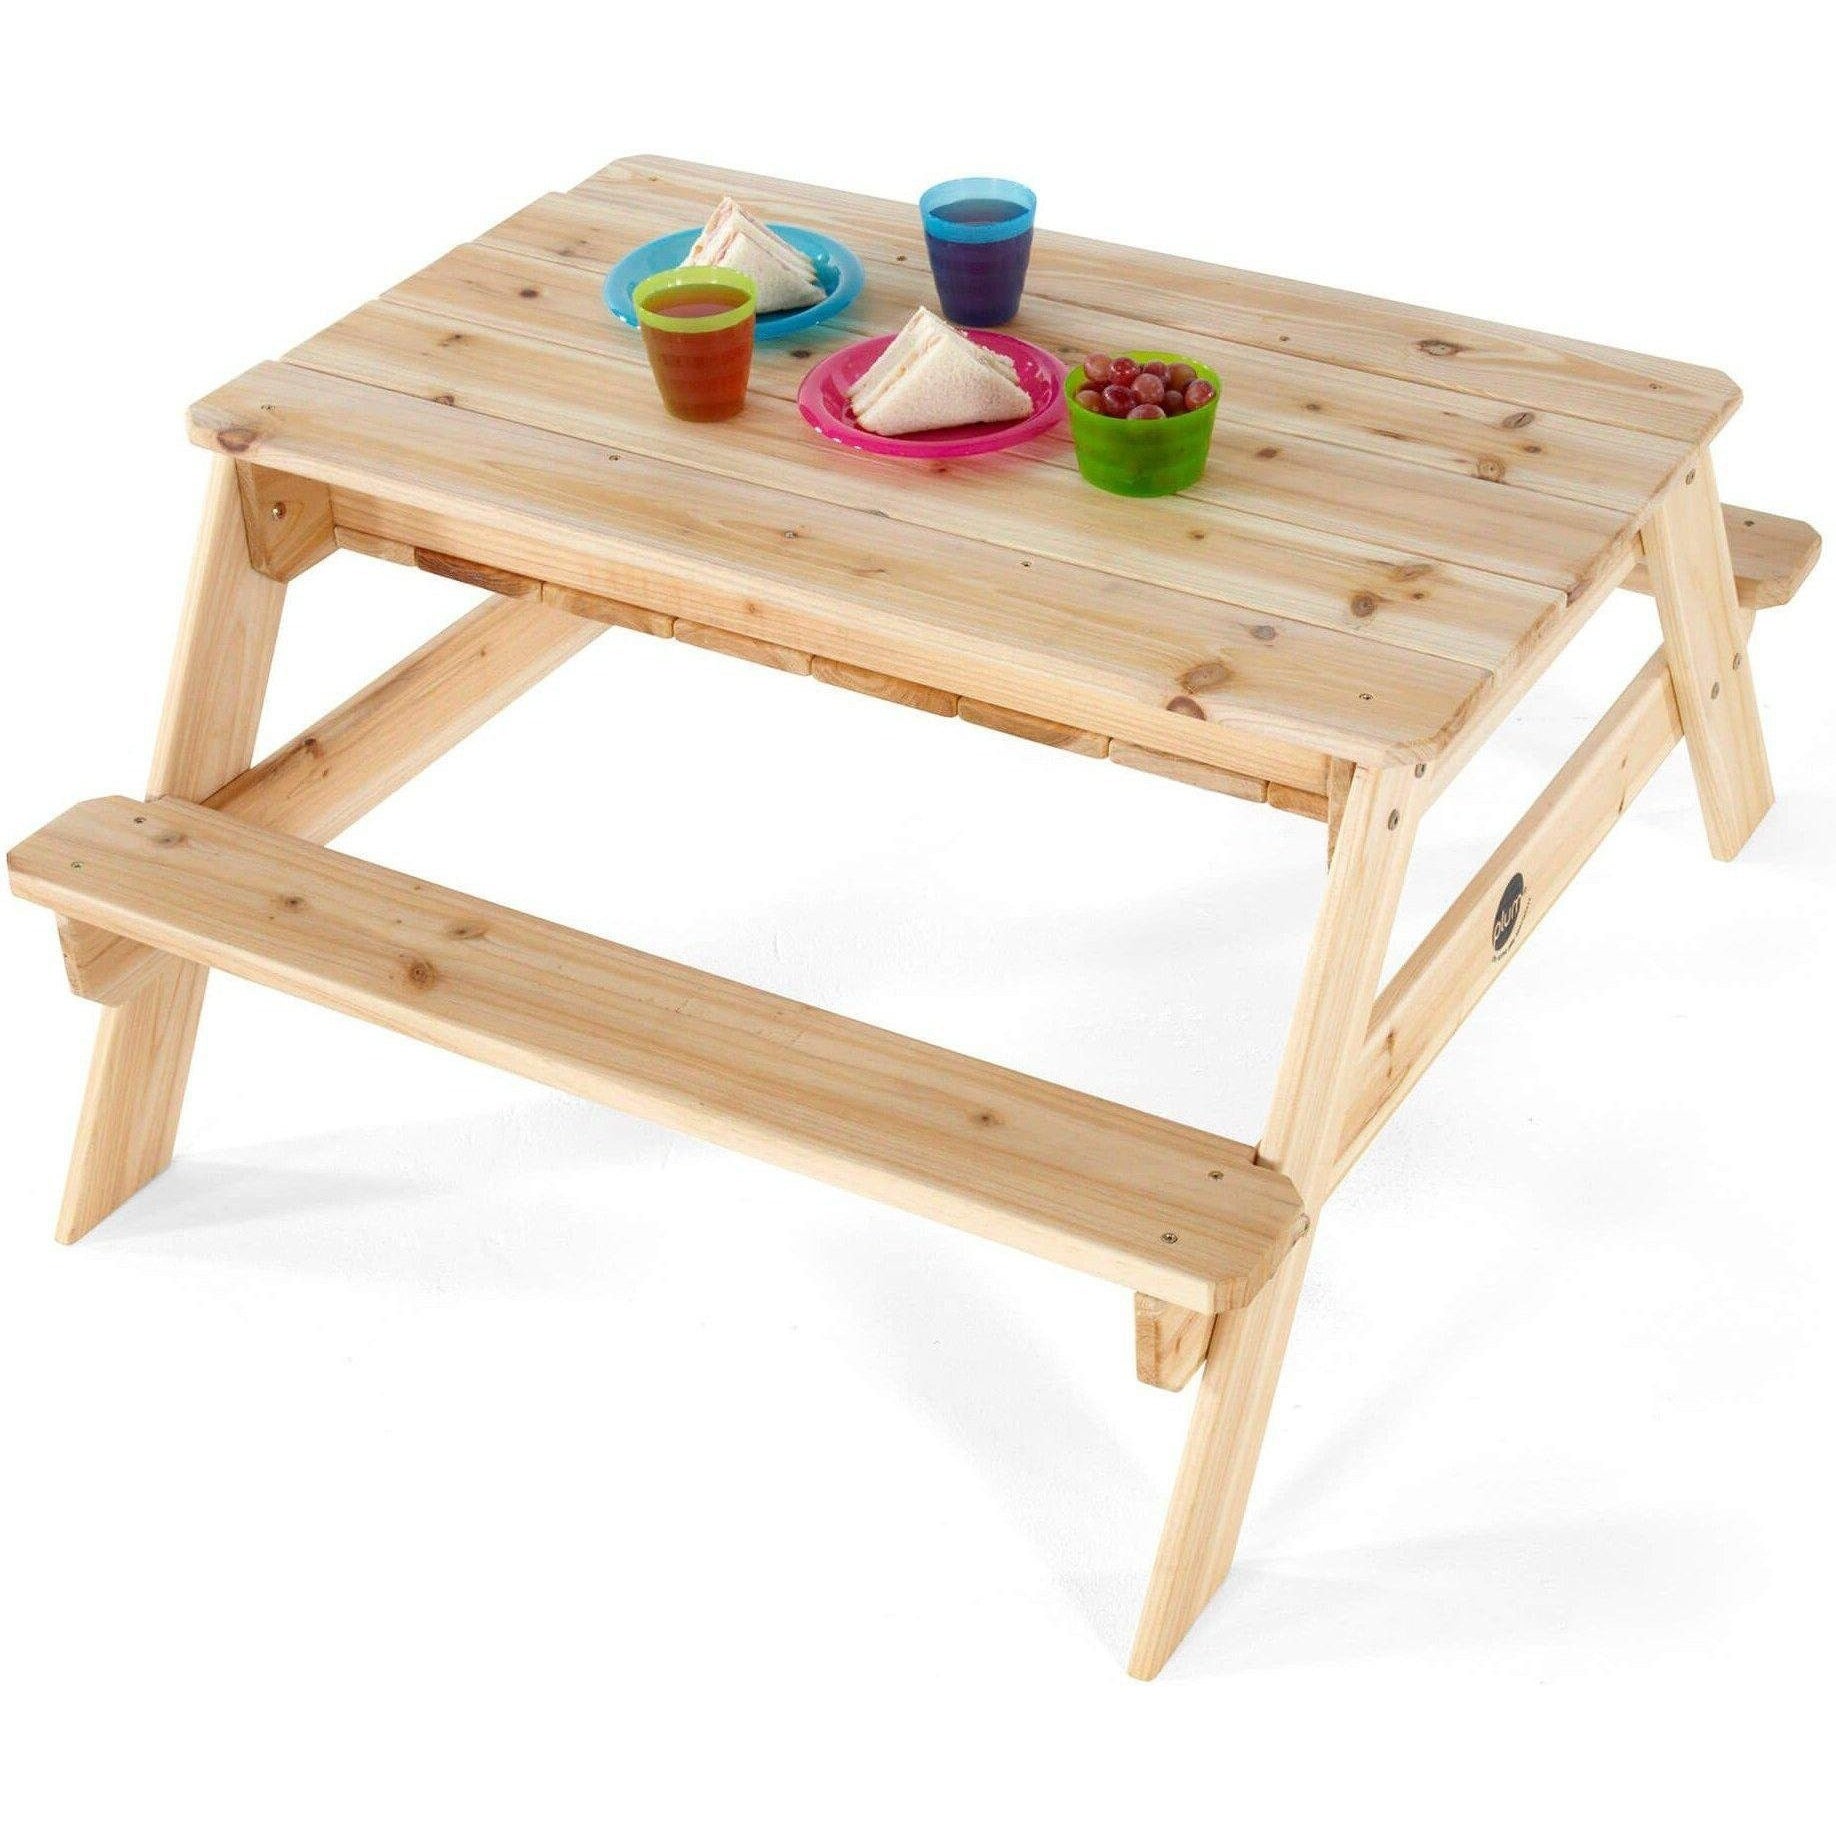 Kids' Sand and Picnic Adventures: Plum Wooden Table for Play and Relaxation